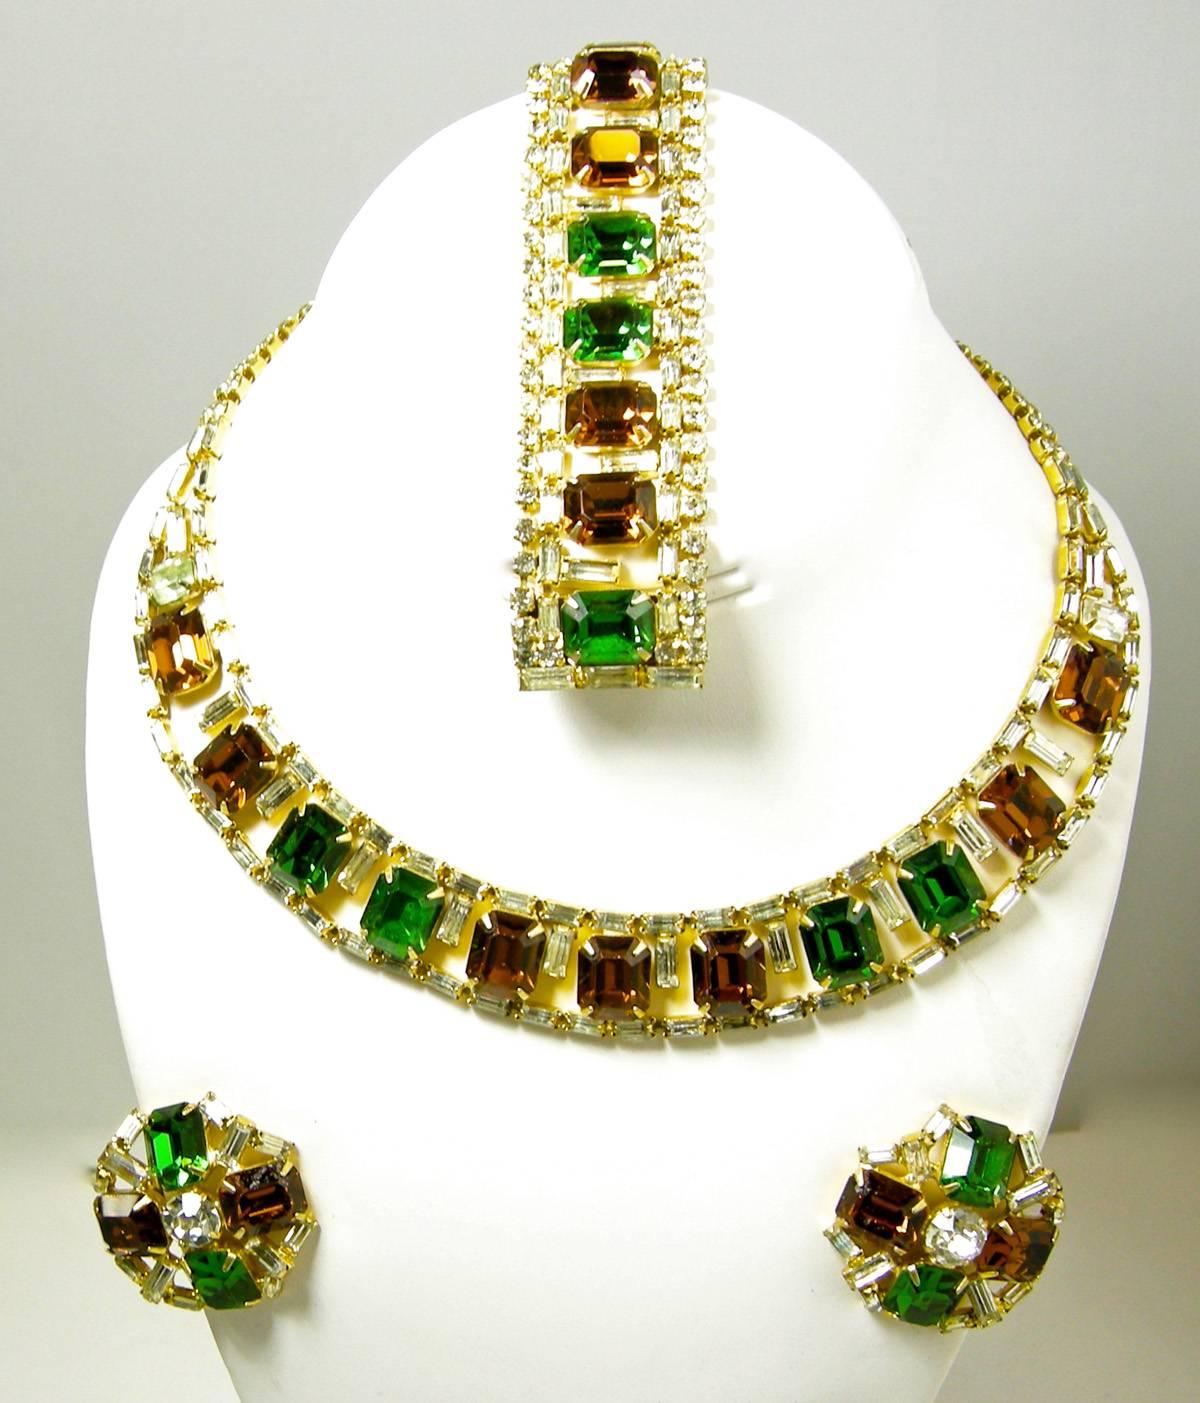 I was very happy to come across this vintage Hobe parure.  It is difficult to find this set complete with the bracelet, earrings and necklace.  This vintage Hobe set is designed with emerald green, topaz brown, and clear baguettes. The necklace